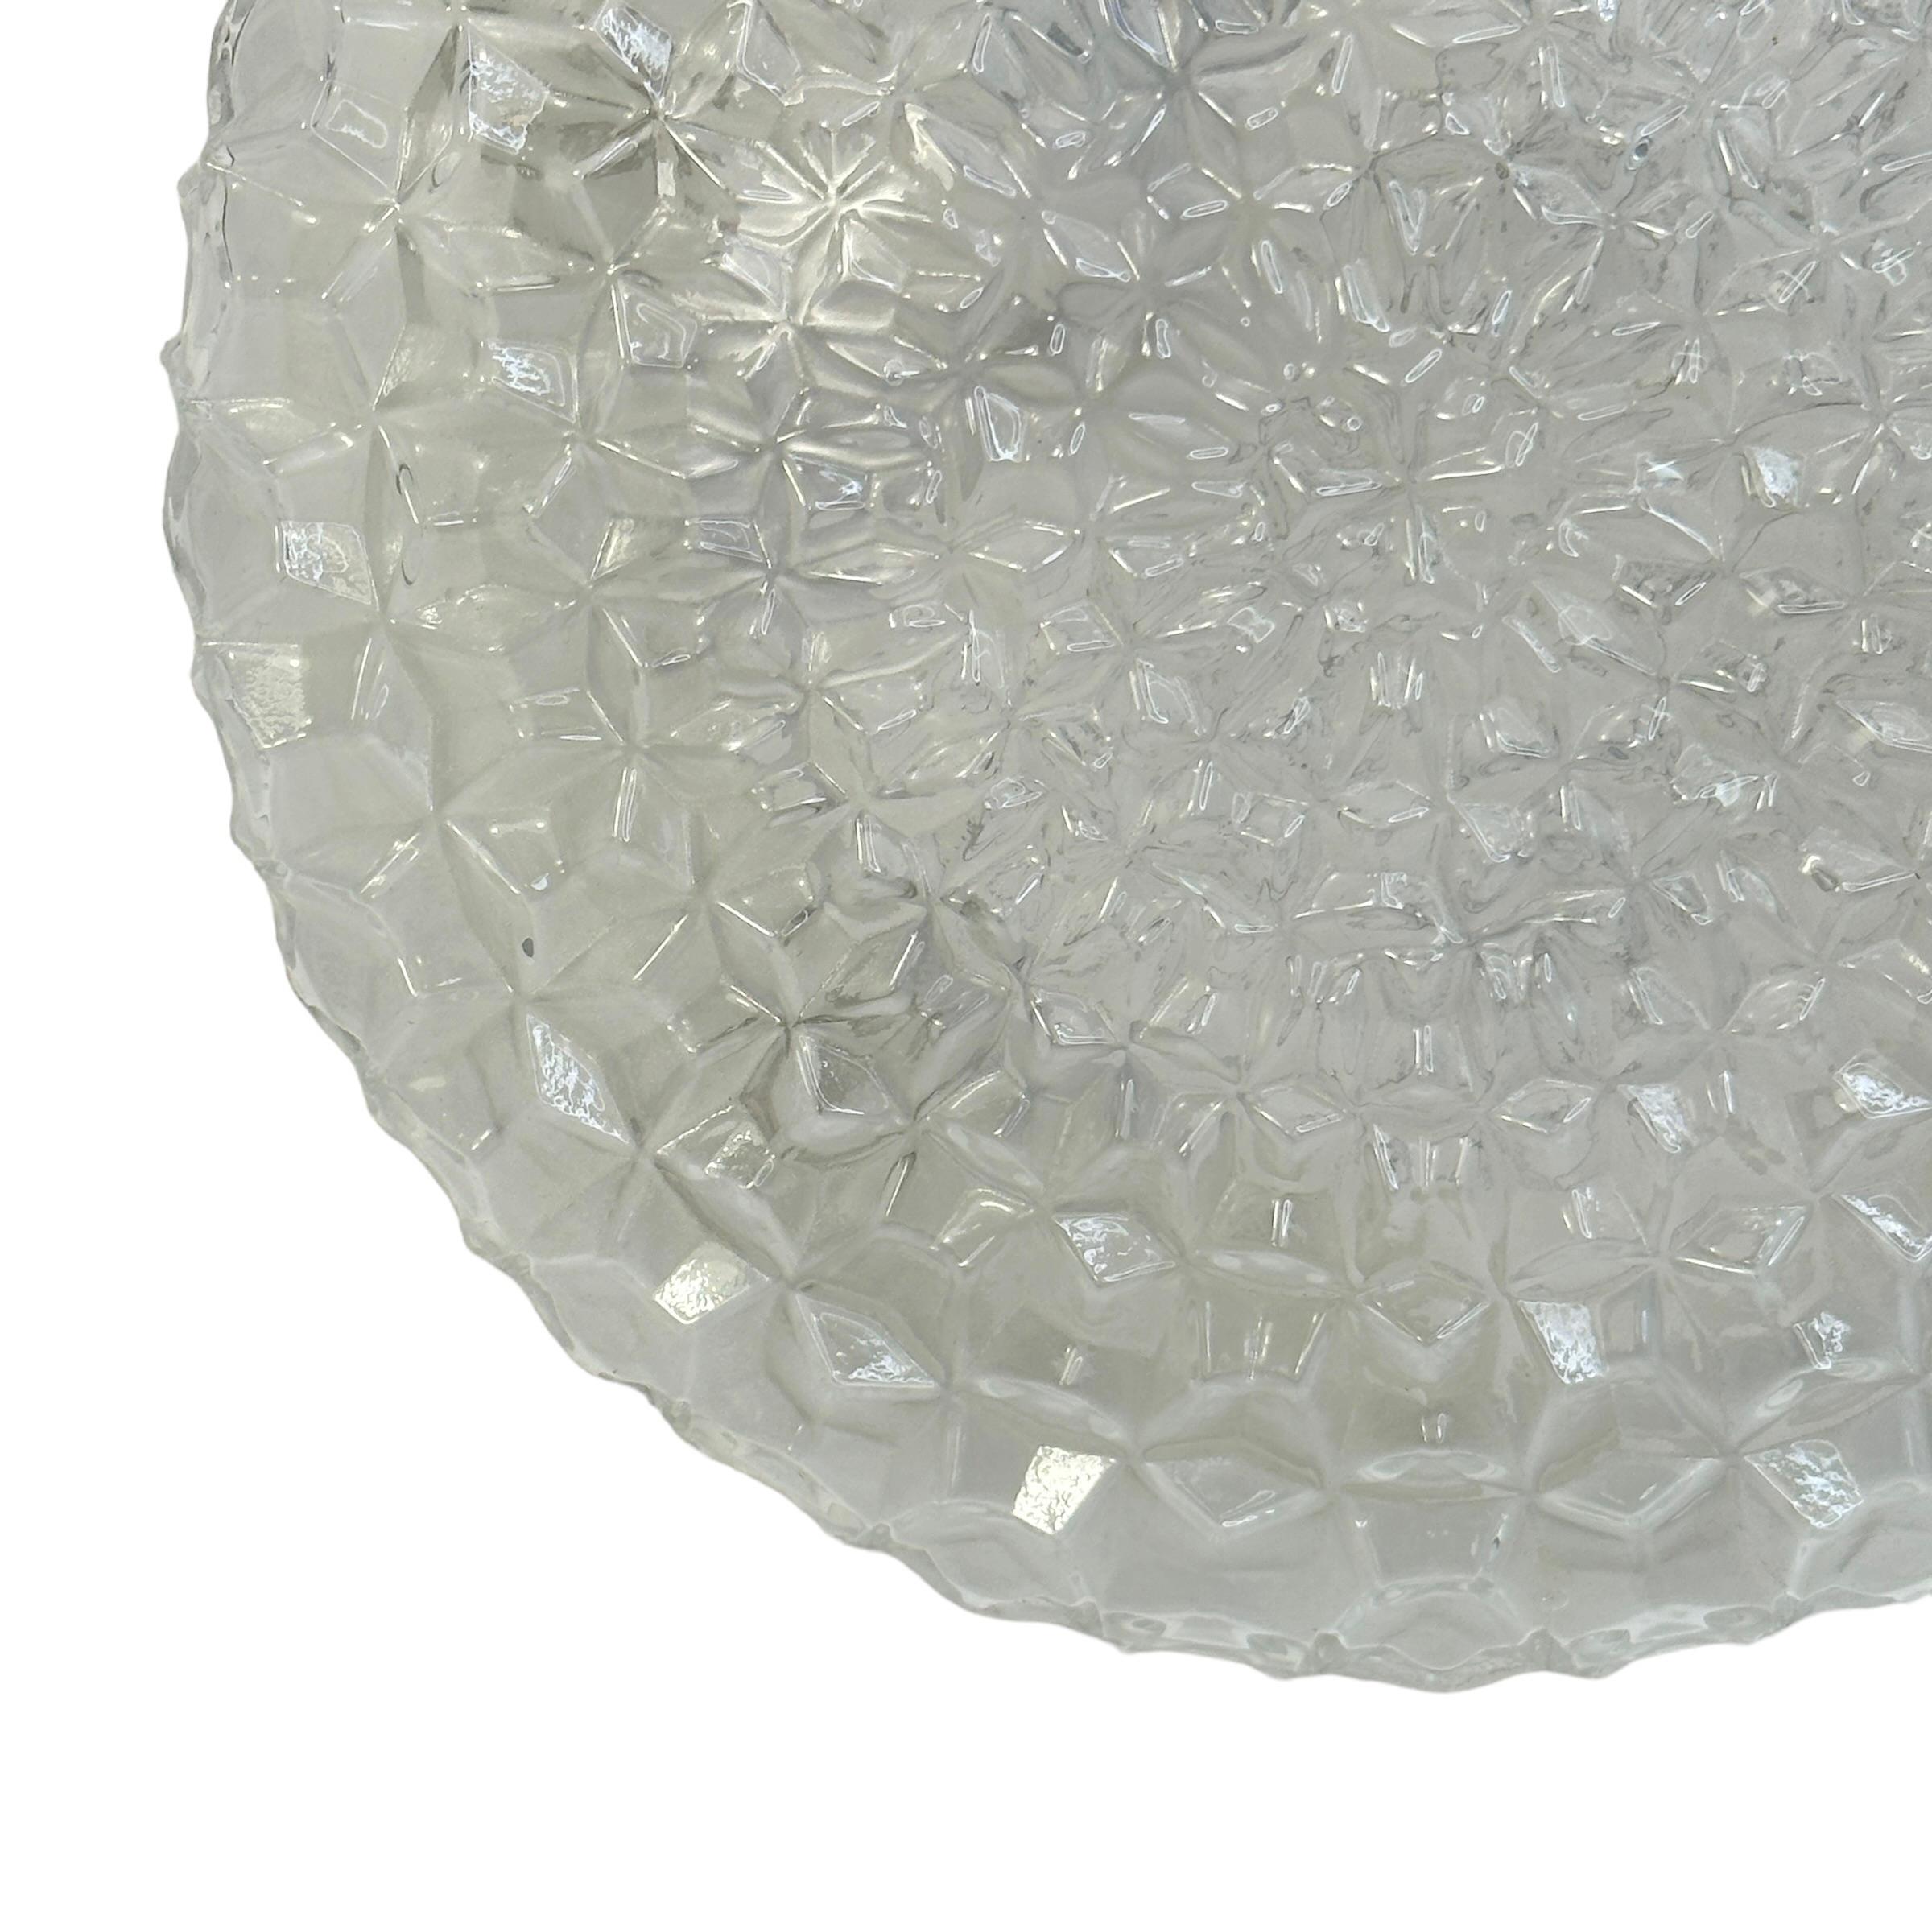 Beautiful ice crystal textured flush mount. Made in Germany by RZB Leuchten. Gorgeous textured glass flush mount with plastic plate. The fixture requires one European E27 Edison bulb up to 75 watts. A nice addition to any room or closet. Found at an